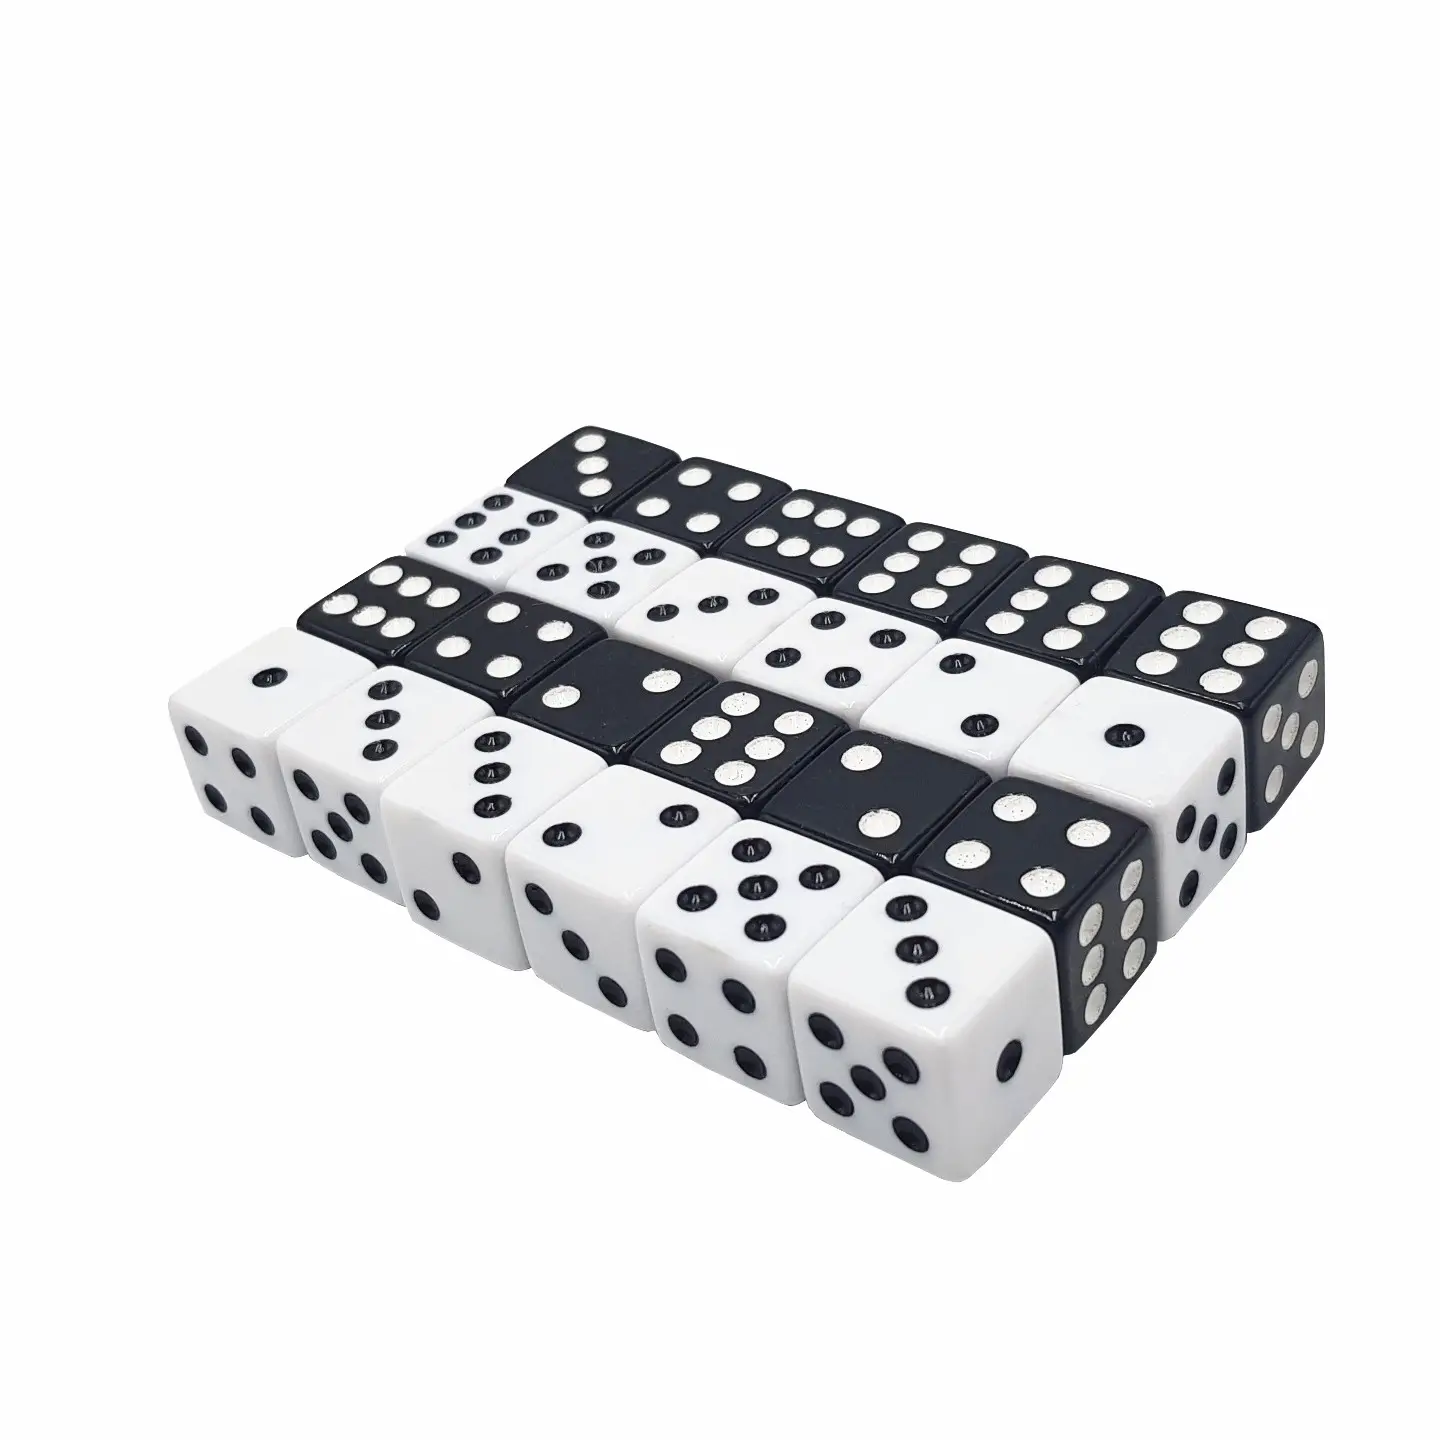 Classical Precision black dice with white dots